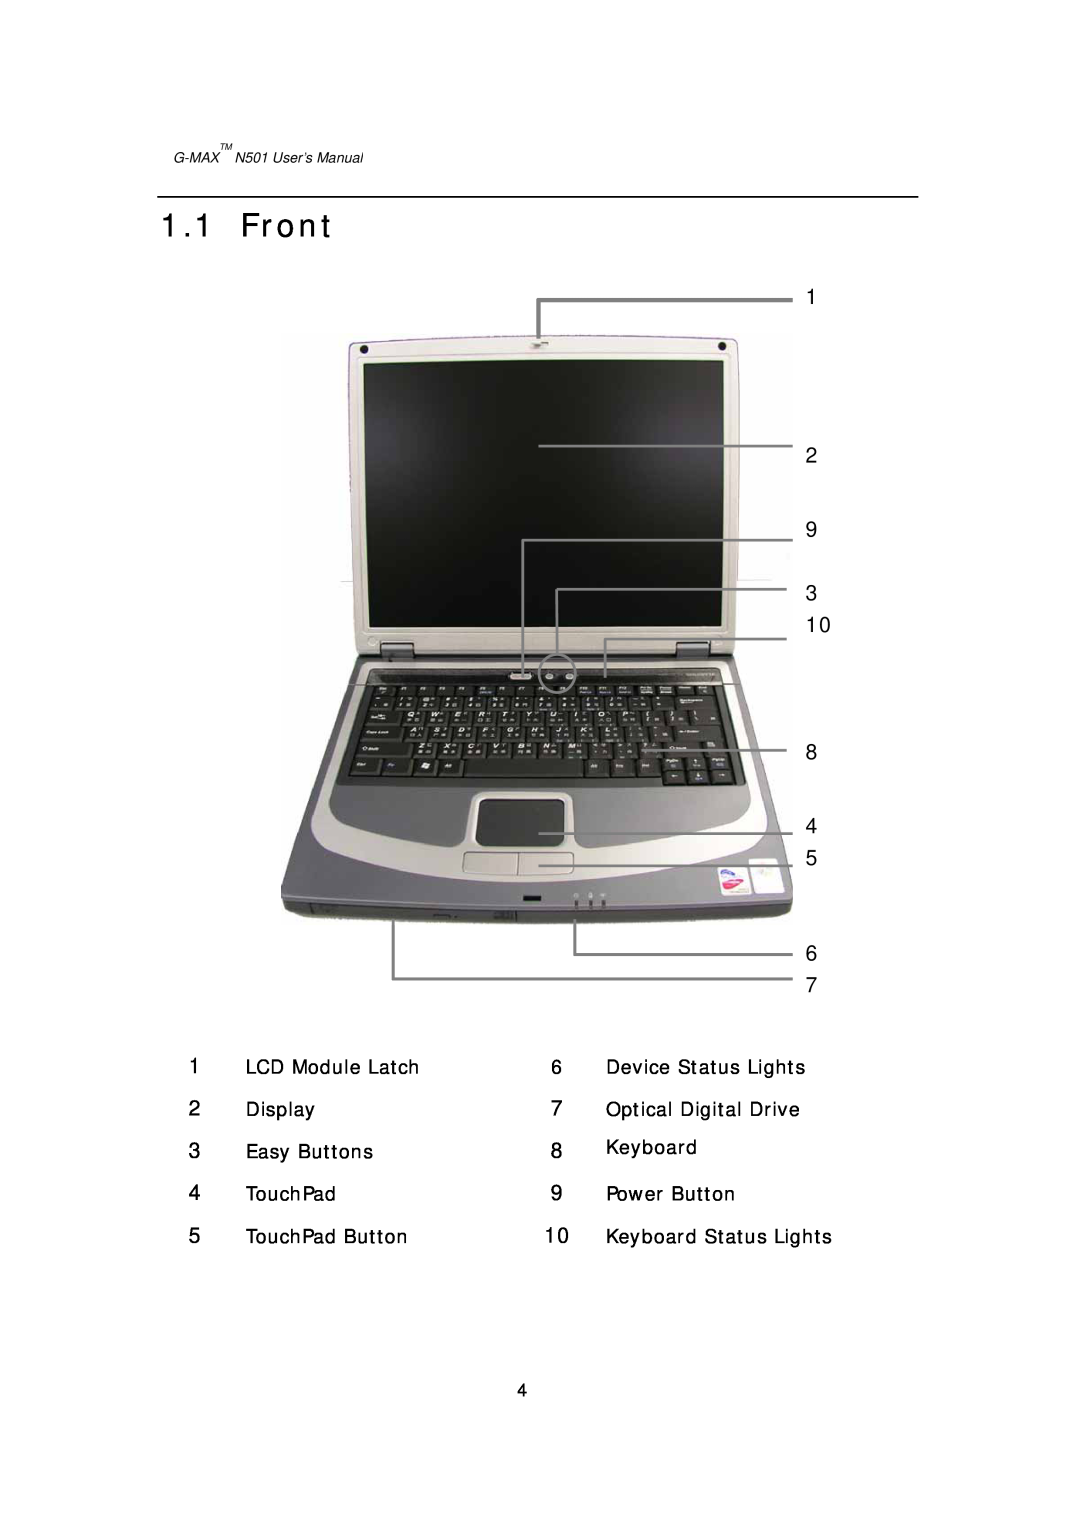 Gigabyte G-MAX N501 user manual Front, LCD Module Latch, Display, Easy Buttons, TouchPad Button, Keyboard Status Lights 